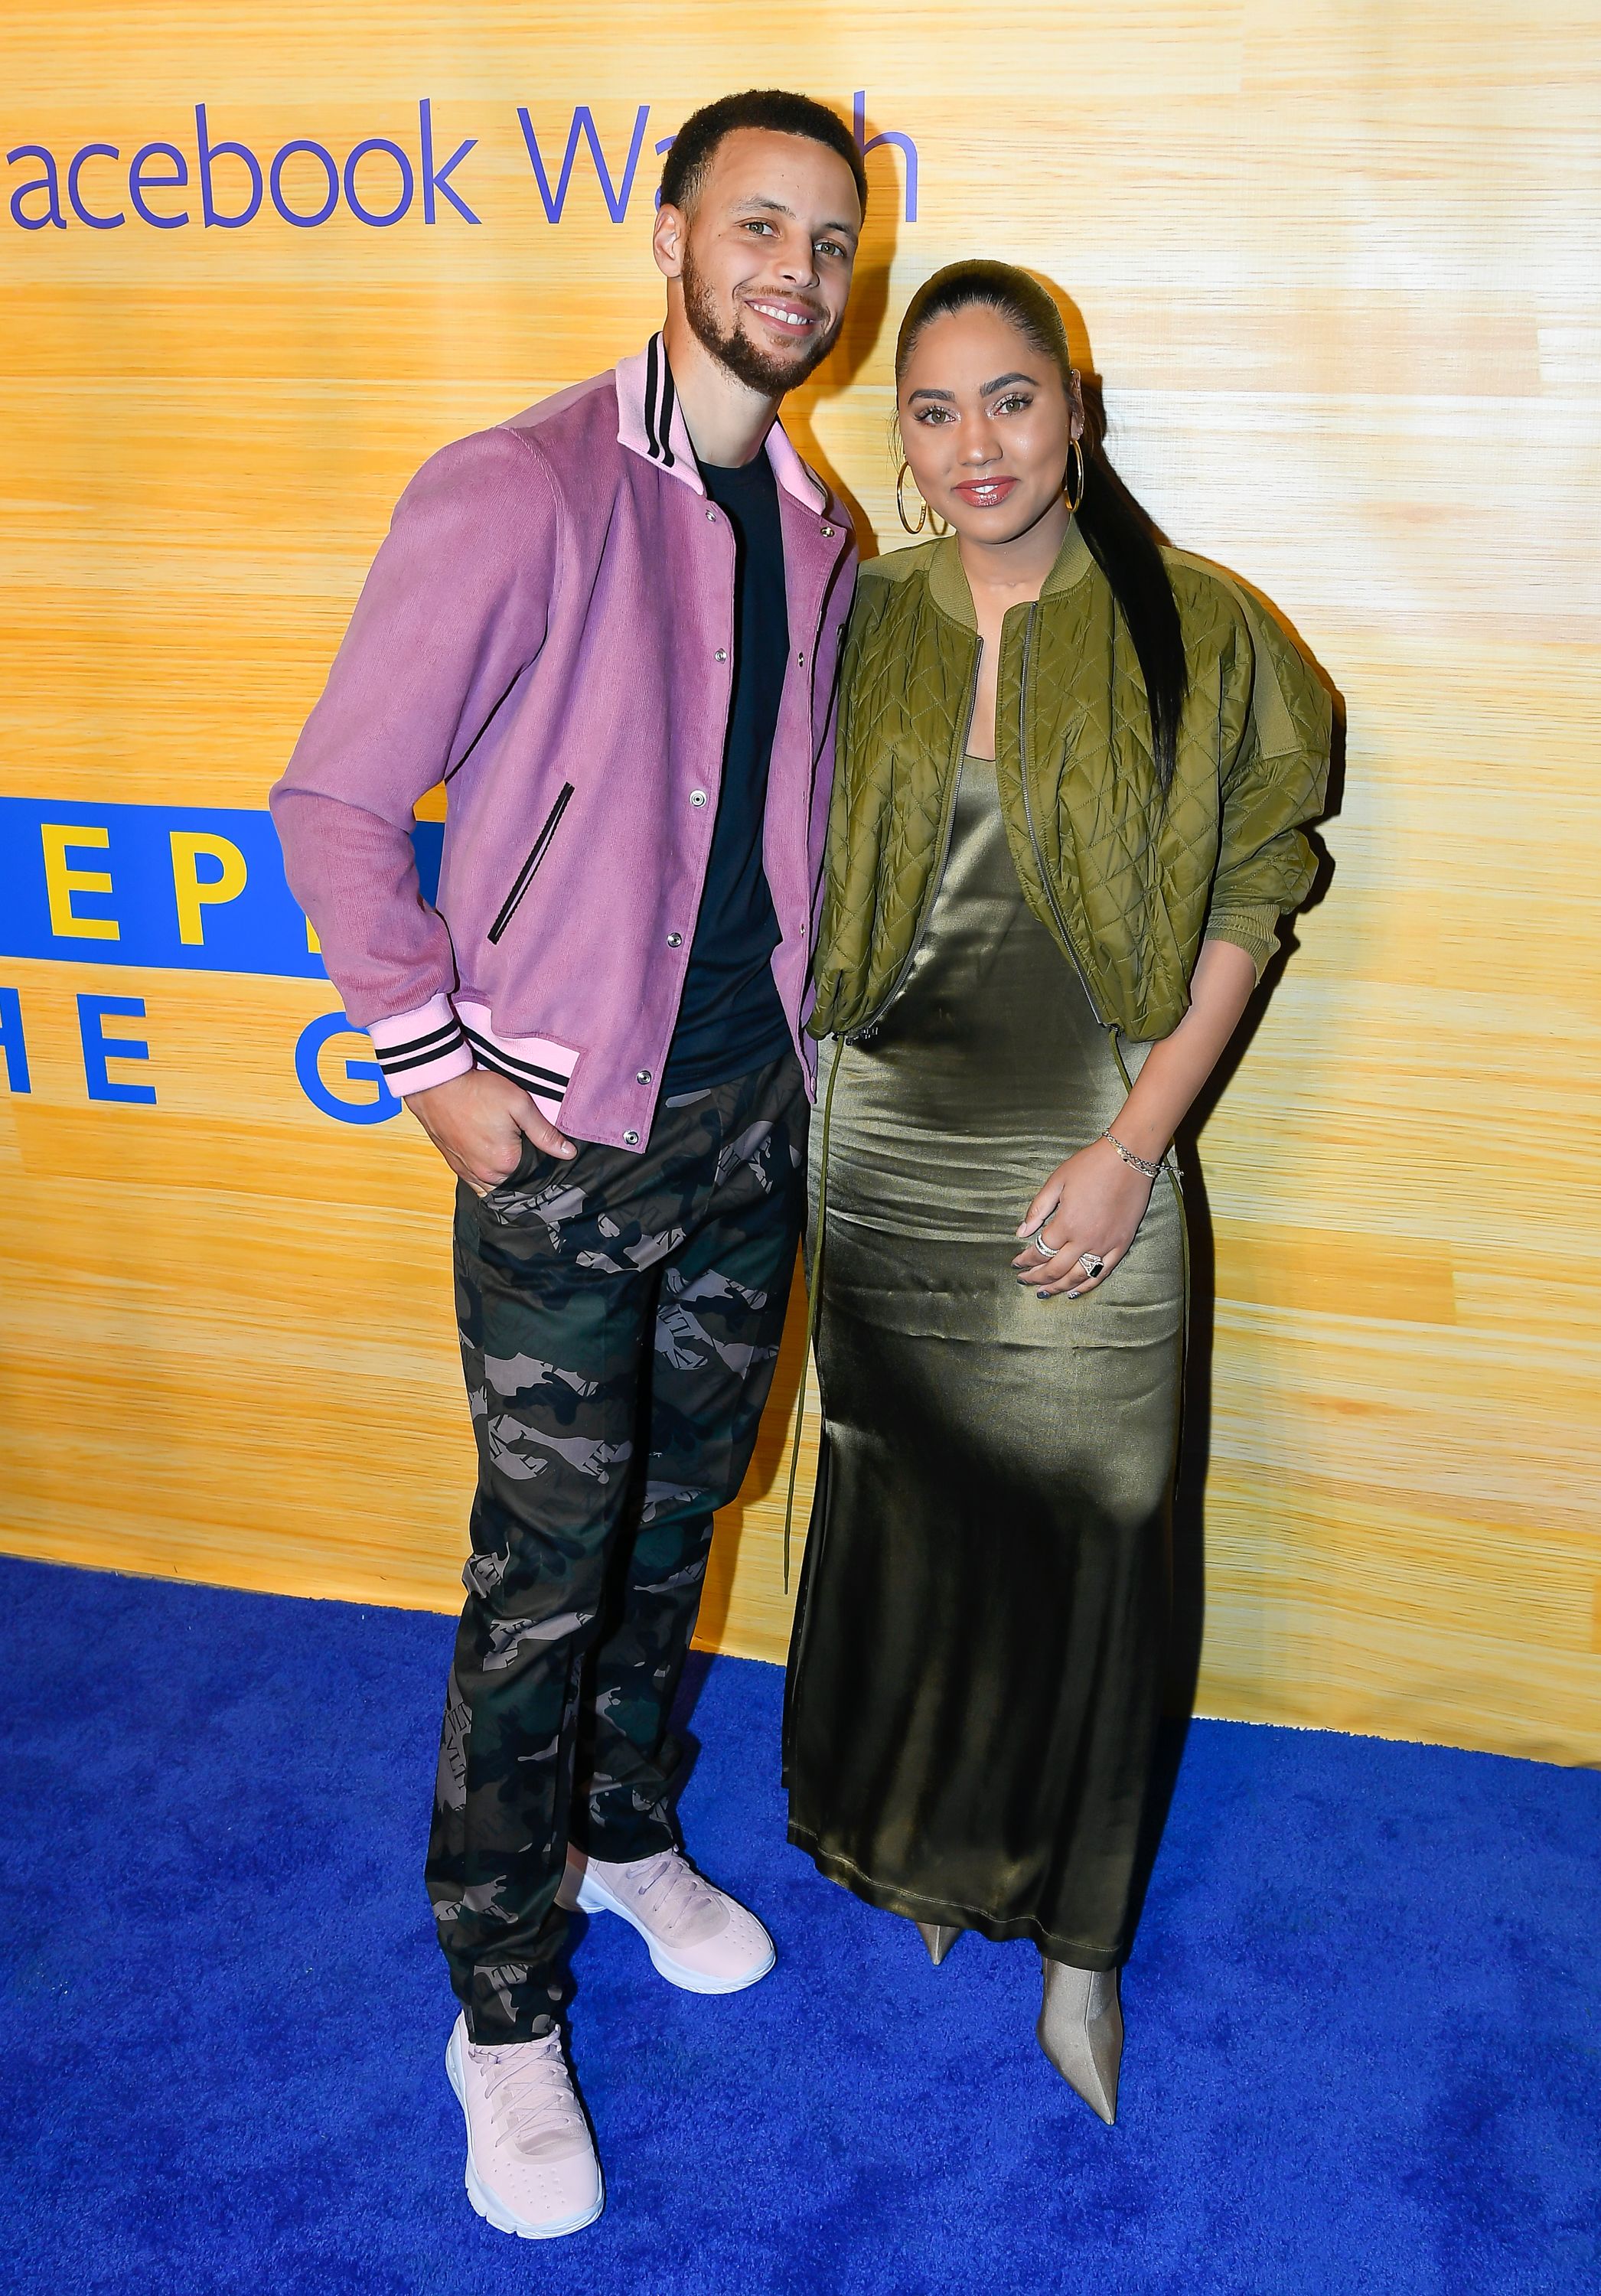 Stephen Curry and Ayesha Curry at the "Stephen Vs The Game" Facebook Watch Preview at 16th Street Station on April 1, 2019 | Photo: Getty Images